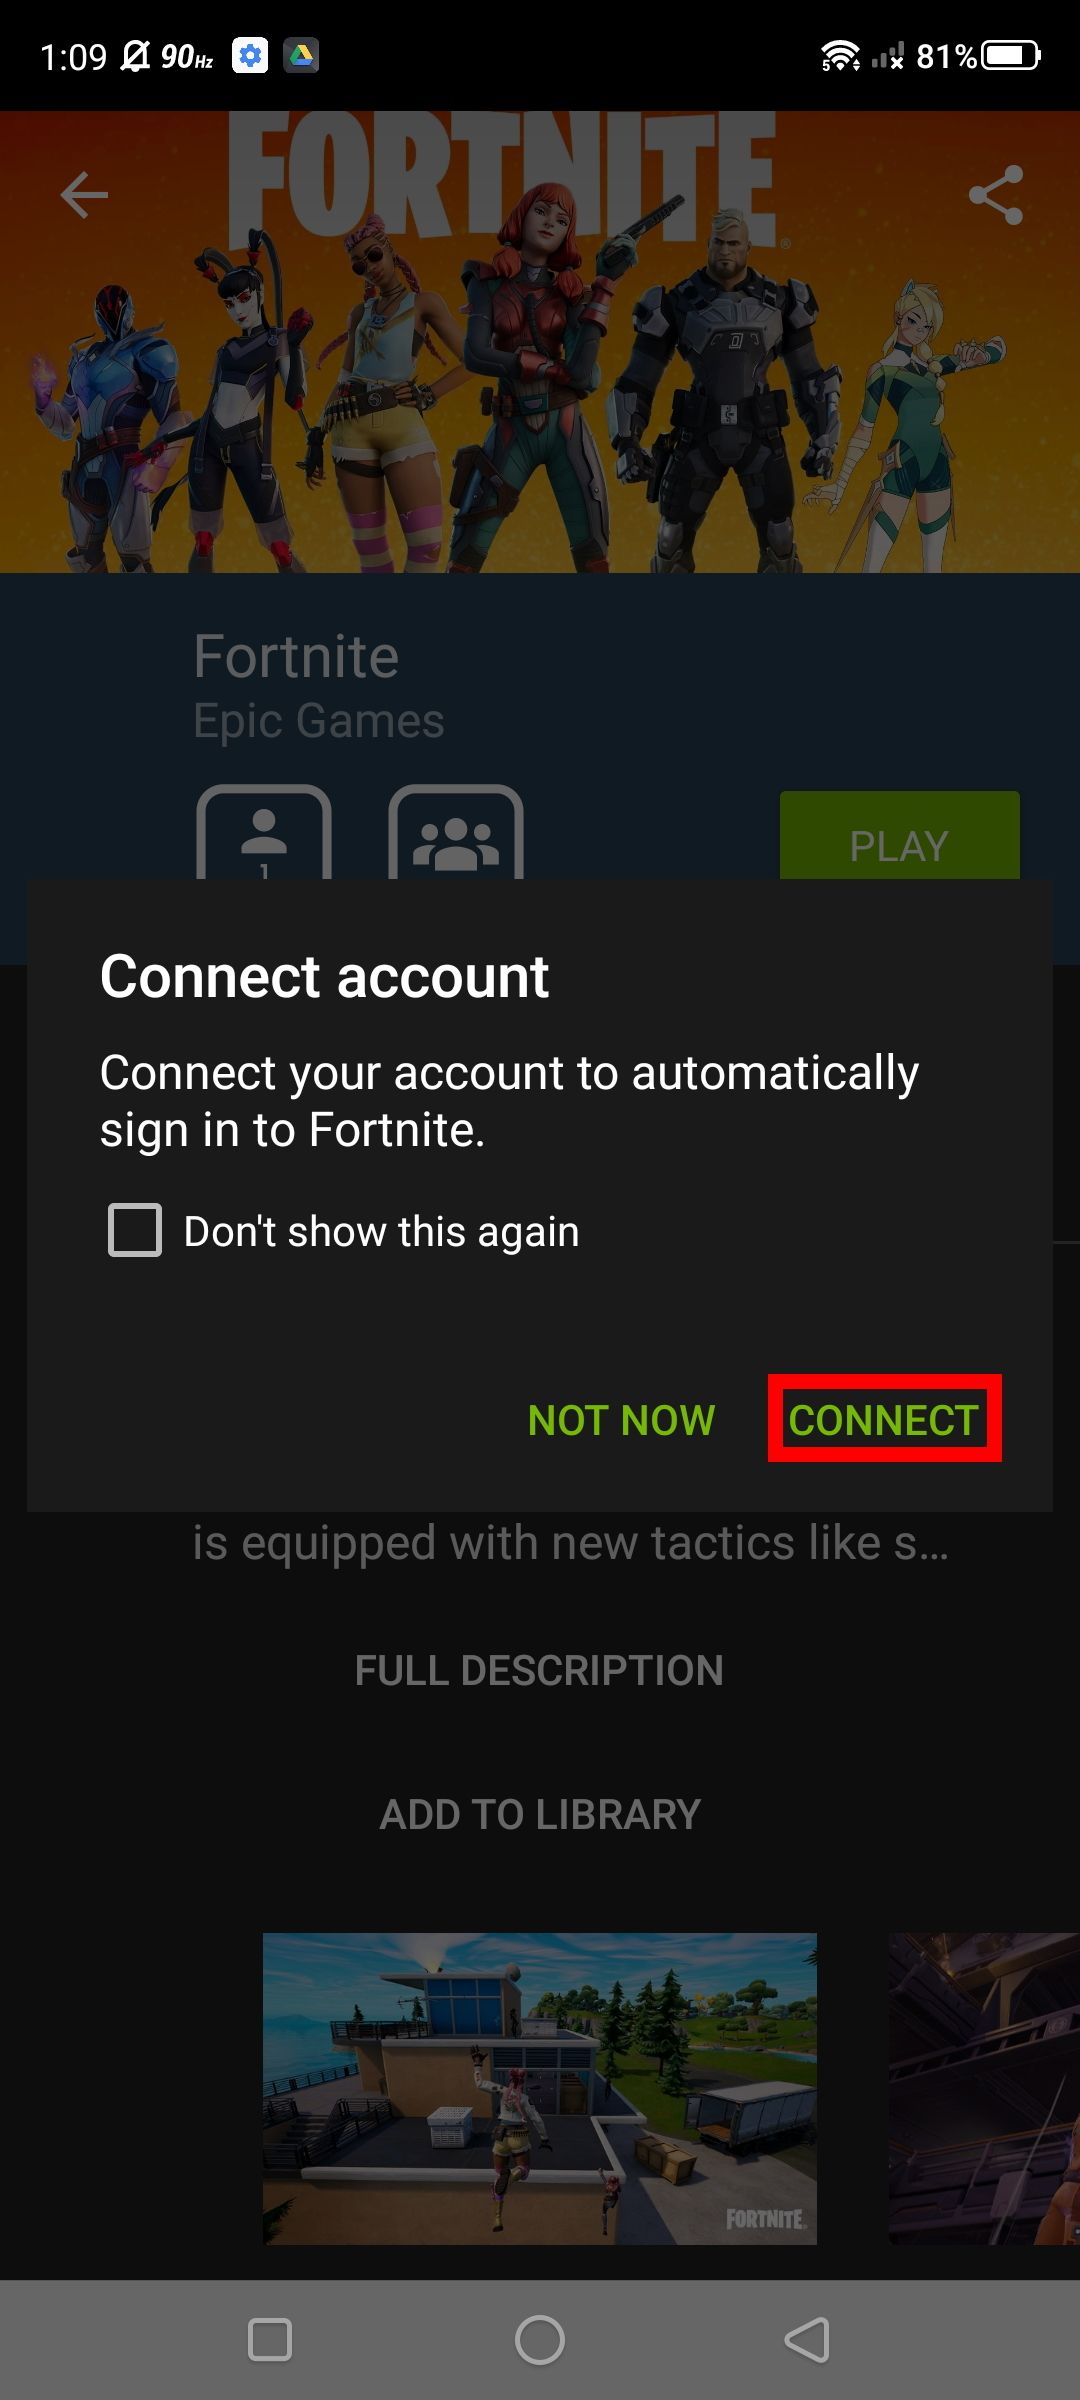 Connecting your account to GeForce Now's Fortnite